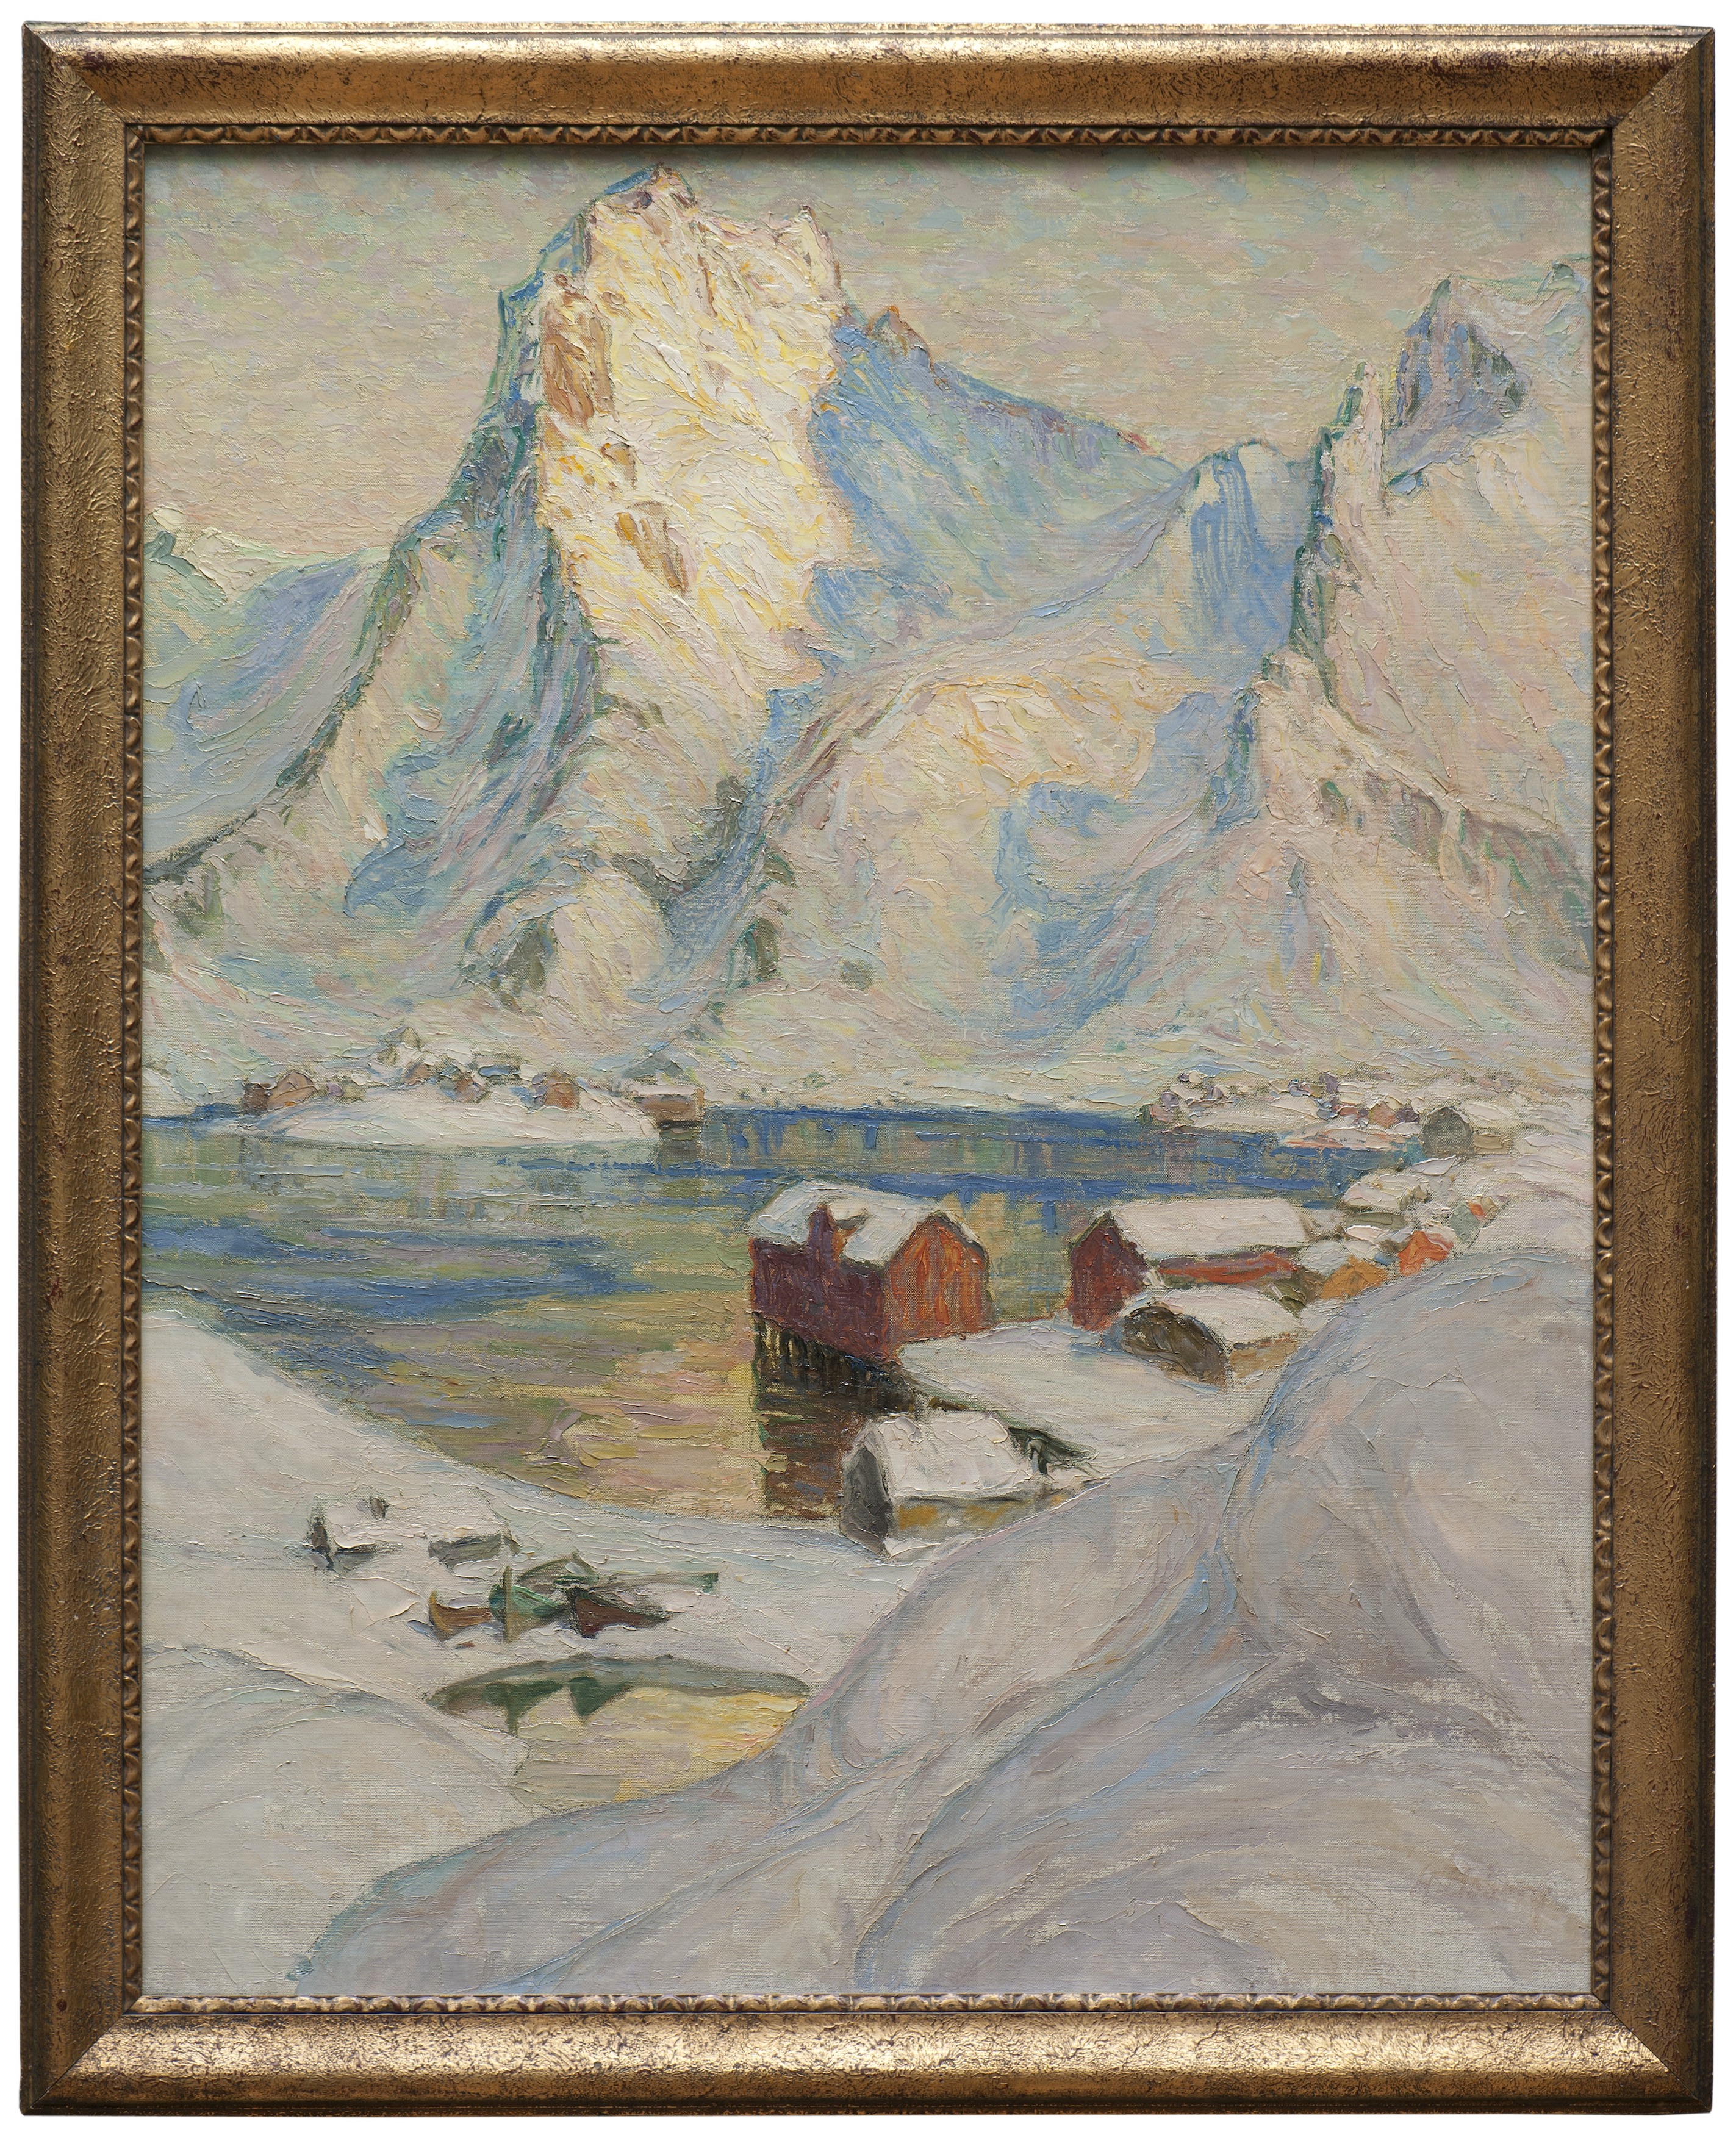 An Arctic Spring Day. Study from North Norway by Anna Boberg - 1st half of the 20th century - 100 x 80 cm Europeana